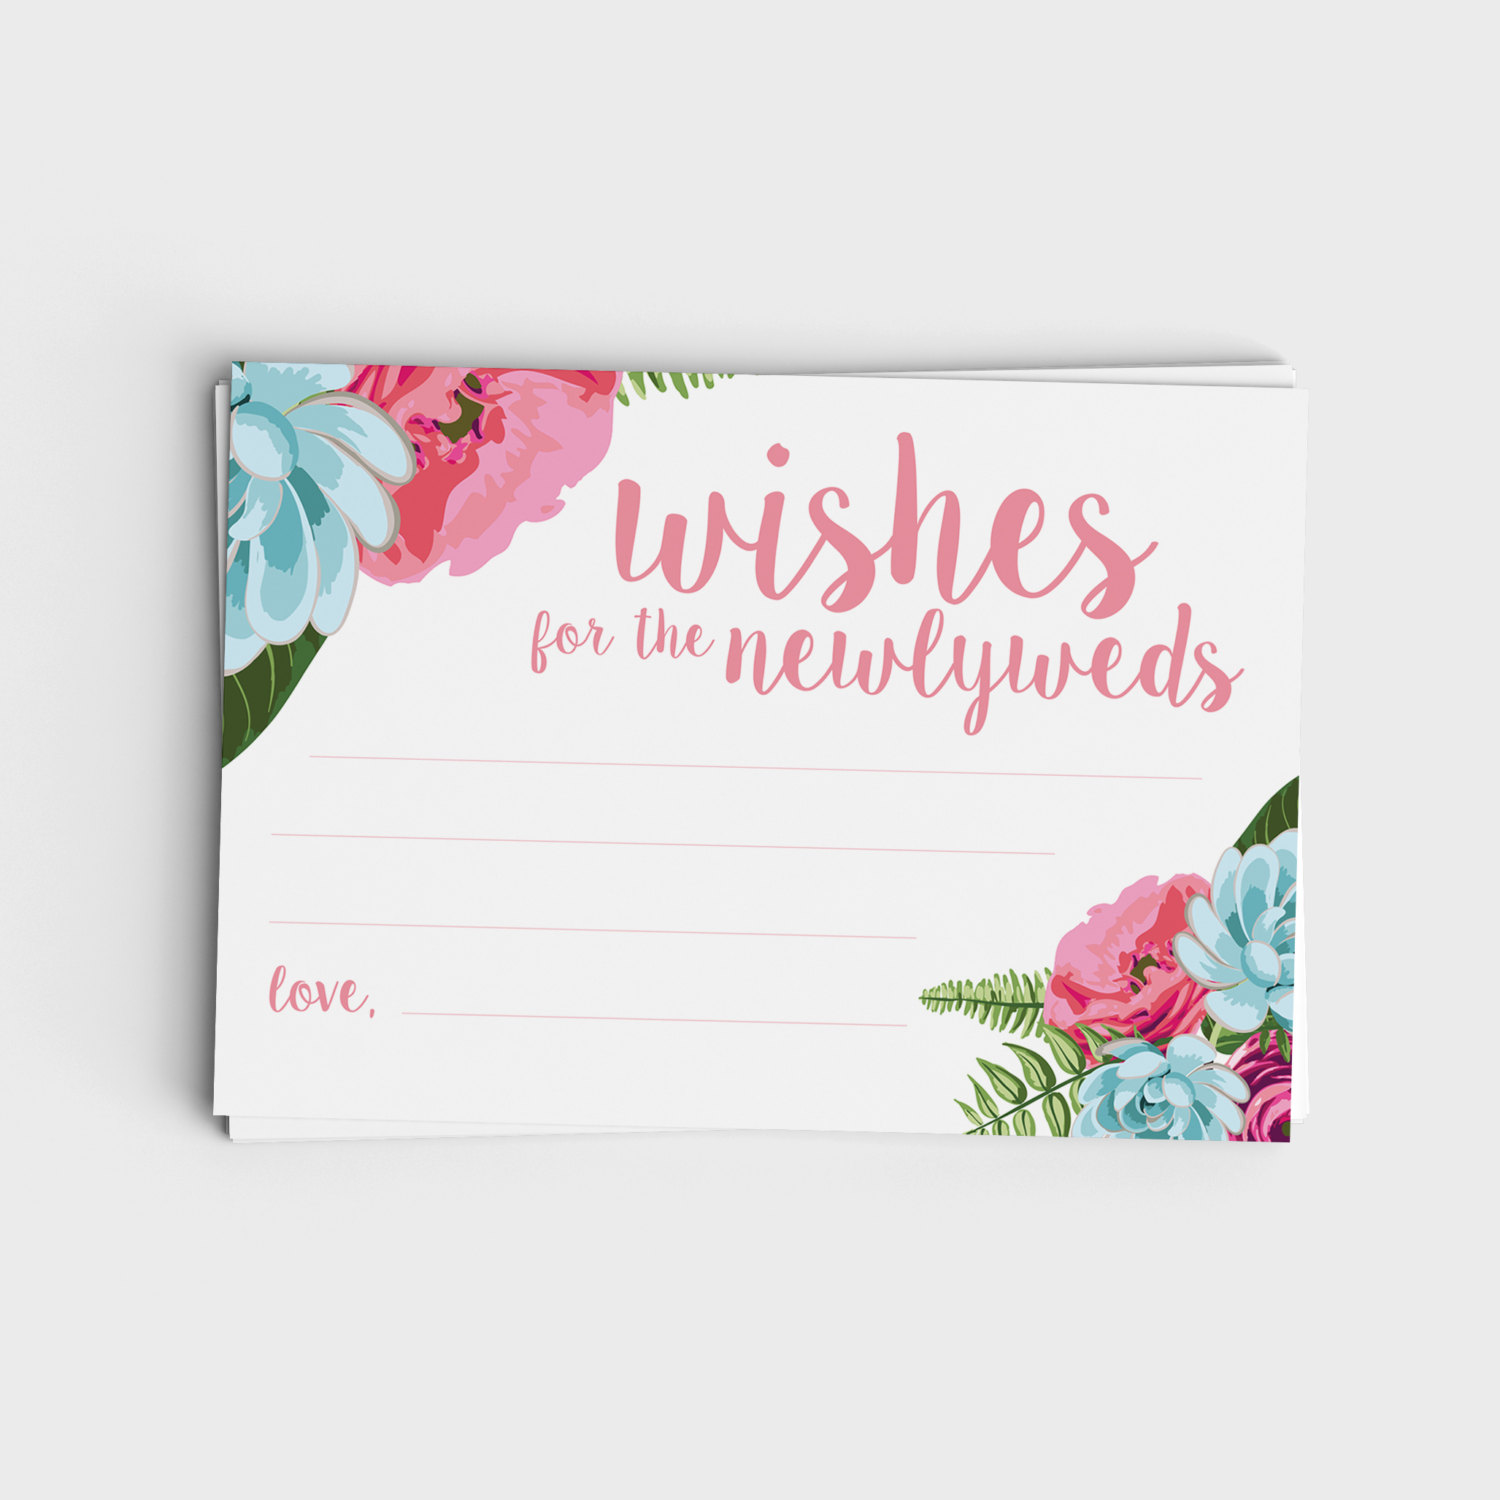 Wishes For Newlyweds - Pink Floral